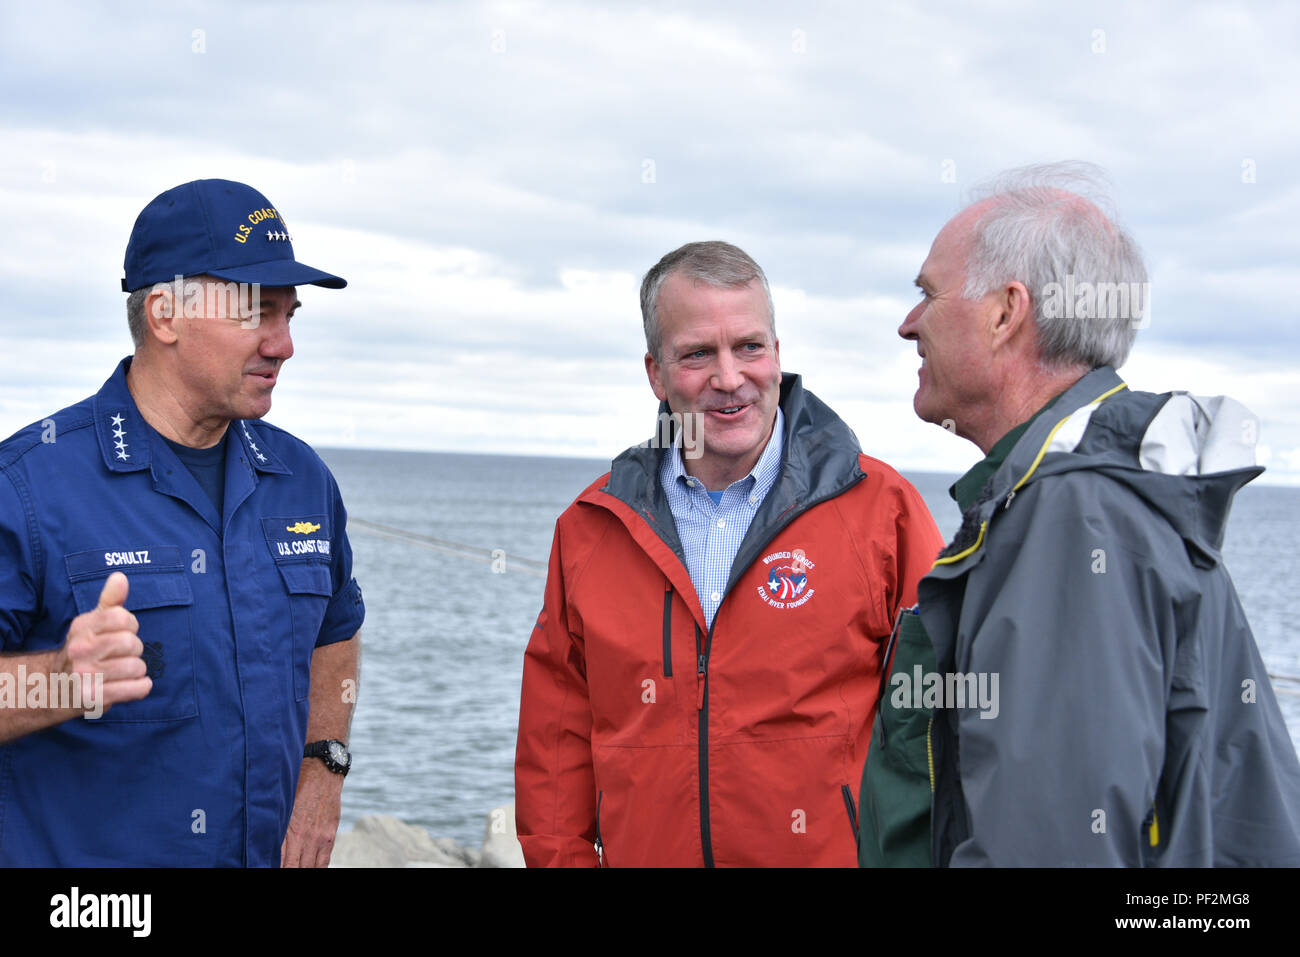 Coast Guard Commandant Adm. Karl Schultz meets with Secretary of the Navy Richard V. Spencer and Alaska Sen. Dan Sullivan in Nome and Port Clarence, Alaska to discuss the construction of deep draft ports in western Alaska, Aug. 13, 2018. This would allow the Coast Guard and Navy to have a strong presence in the U.S. Arctic. U.S. Coast Guard photo by Petty Officer 1st Class Jetta Disco. Stock Photo